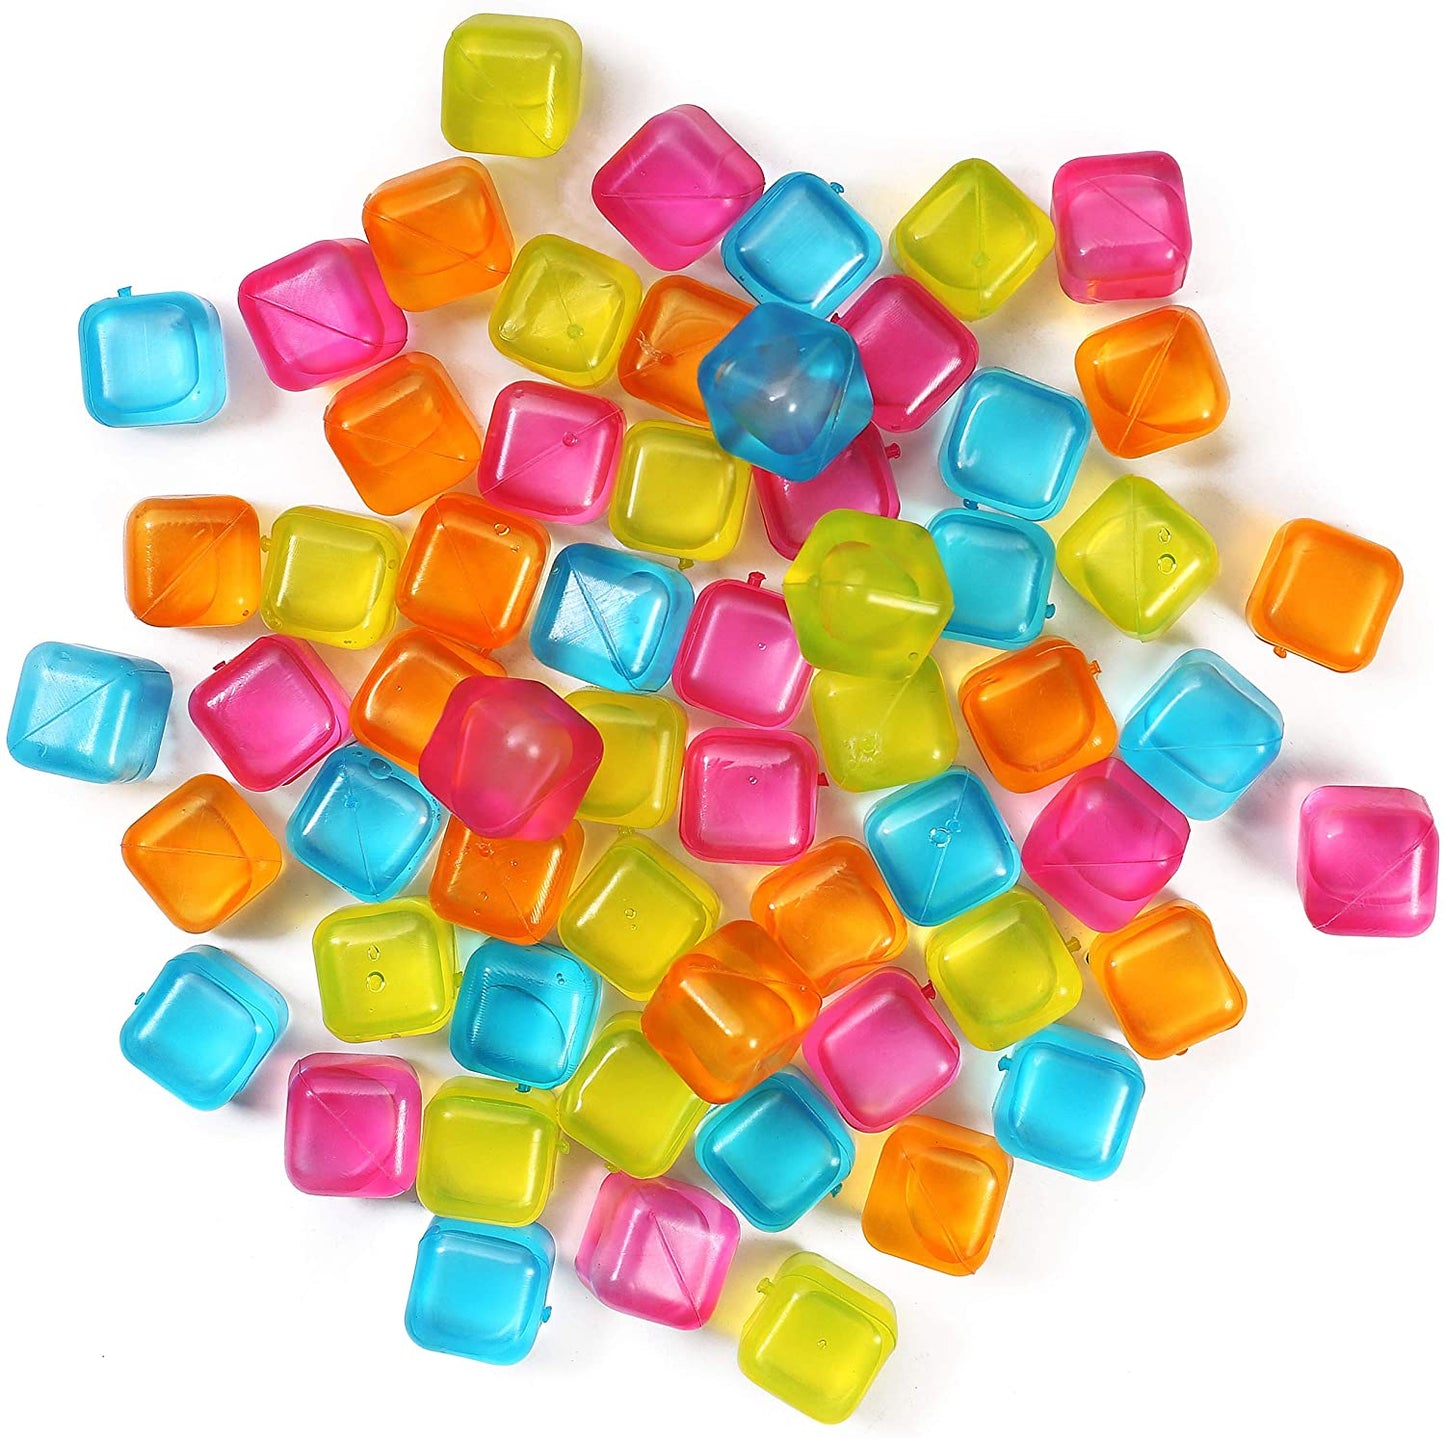 Reusable Ice Cube Plastic Ice Cubes Colorful Refreezable Ice Cubes